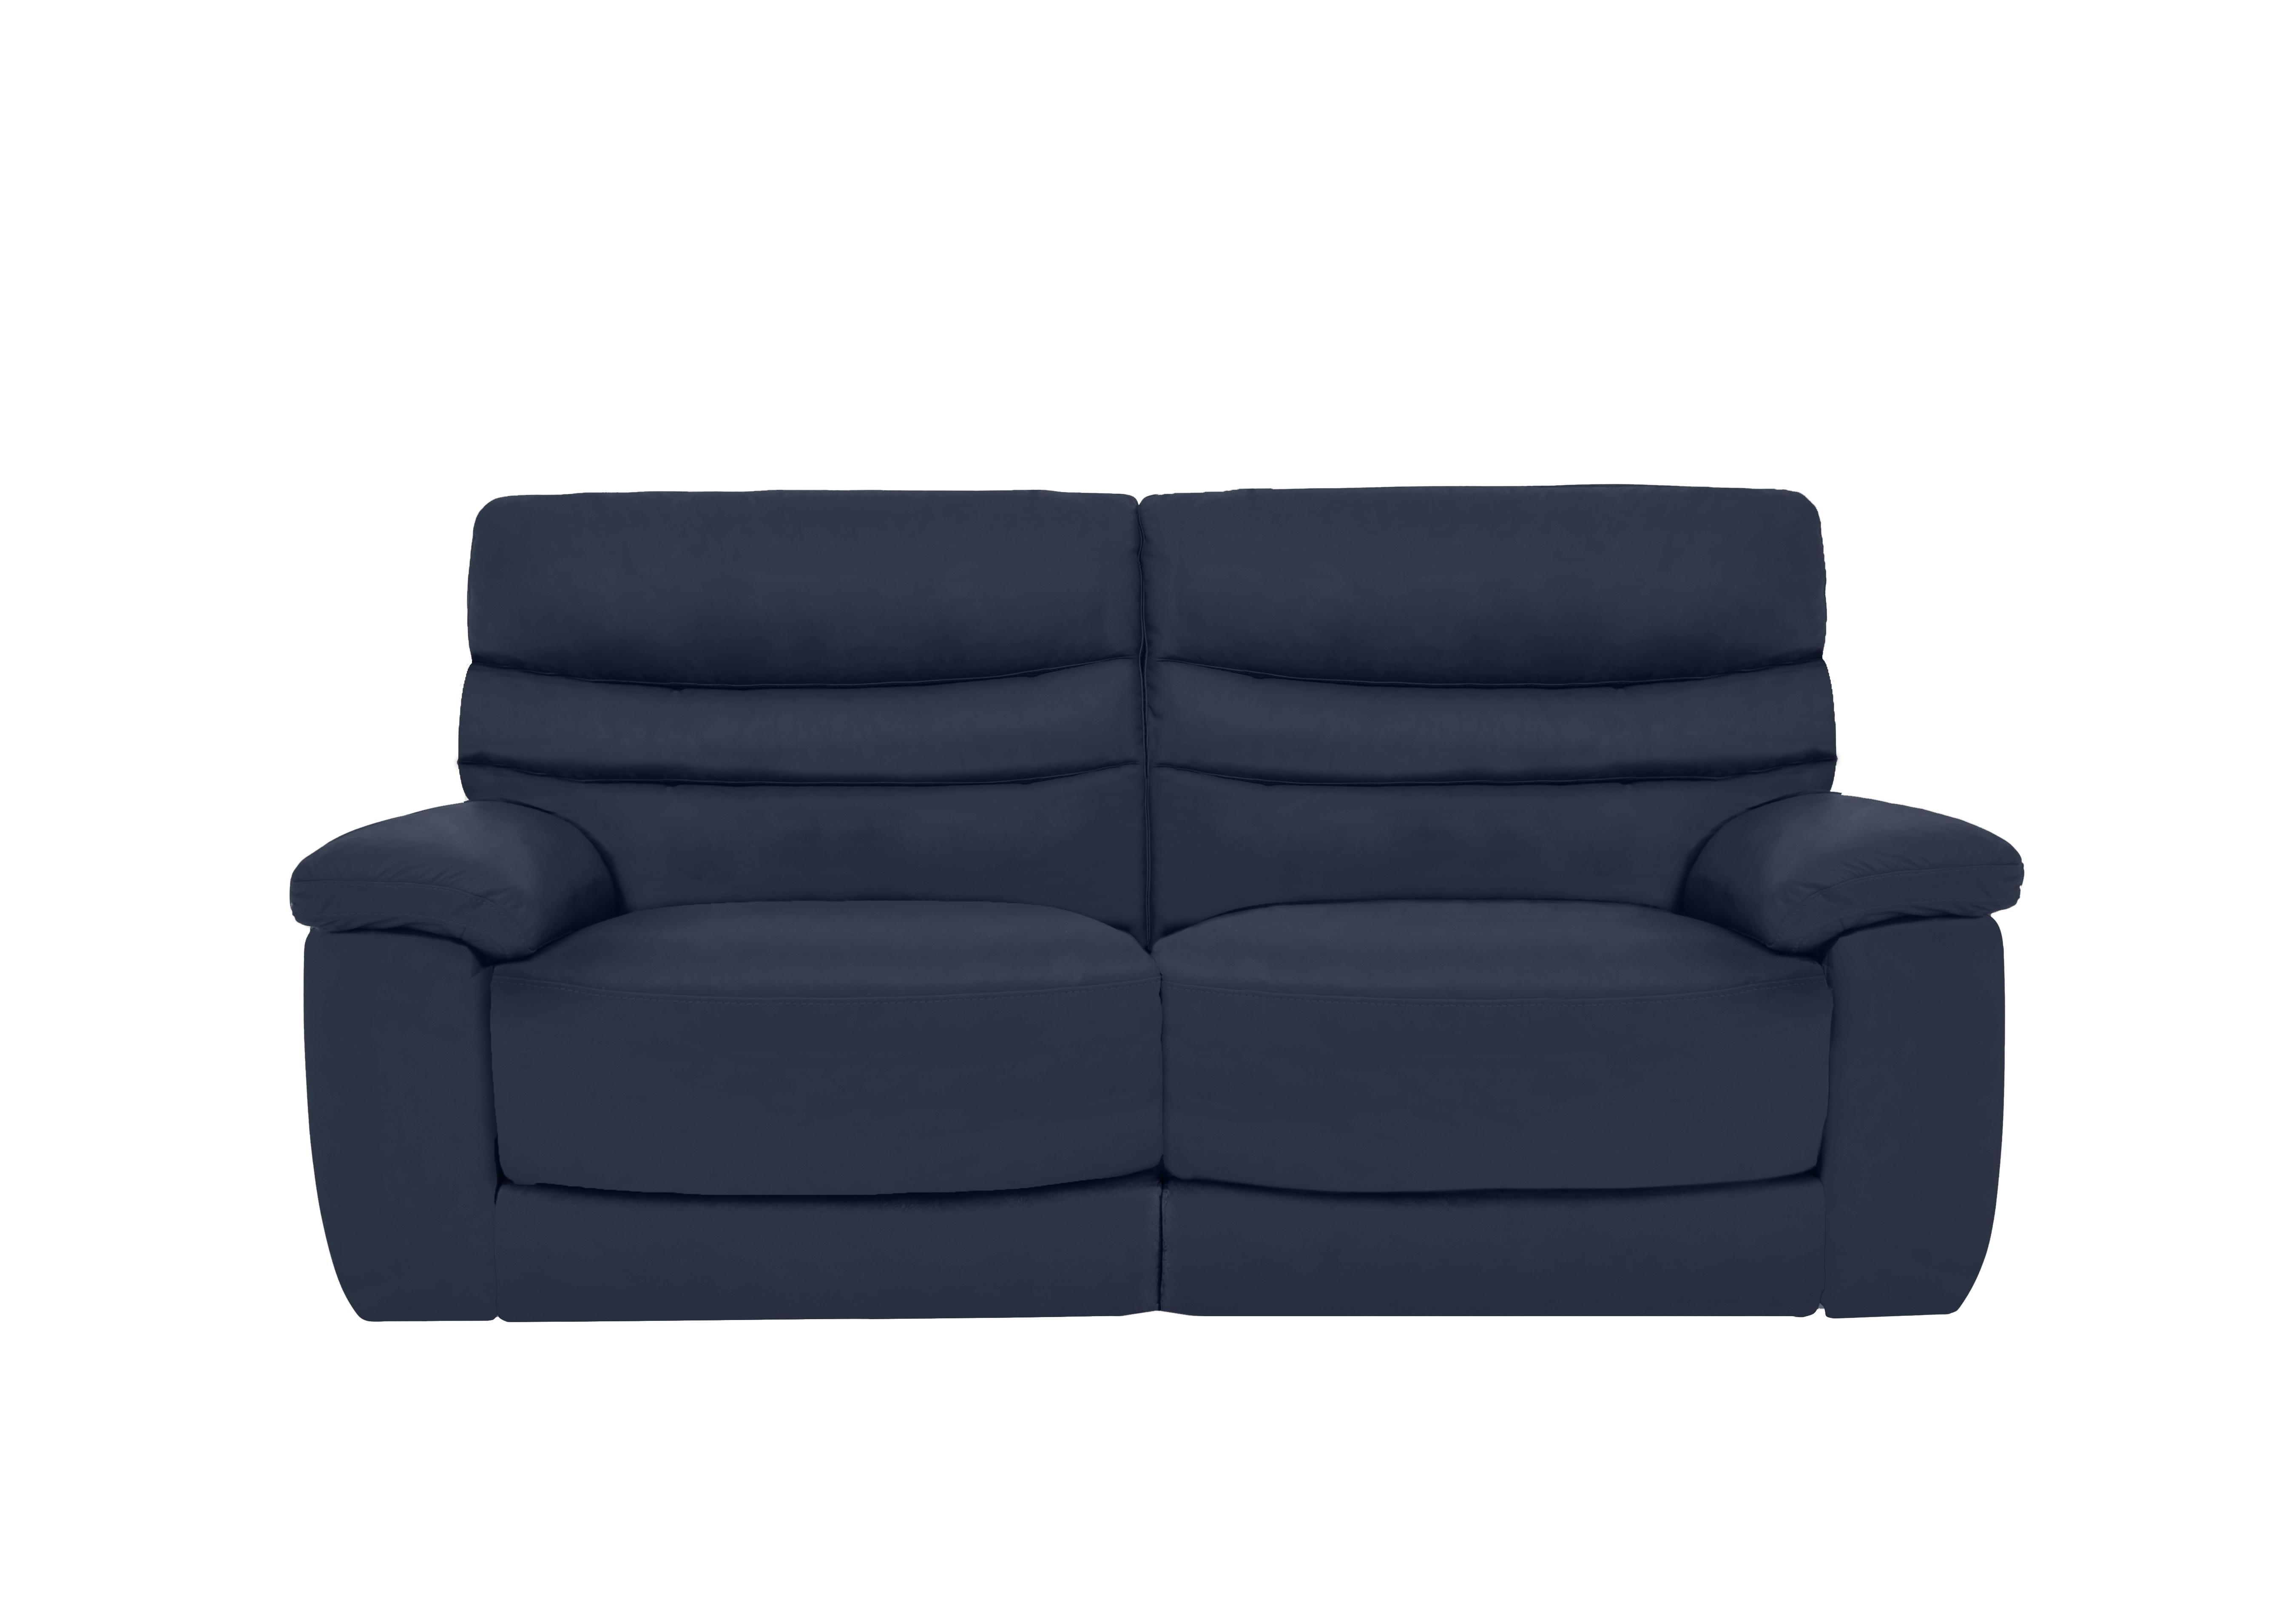 Nimbus 3 Seater Leather Sofa in Bx-036c Navy on Furniture Village